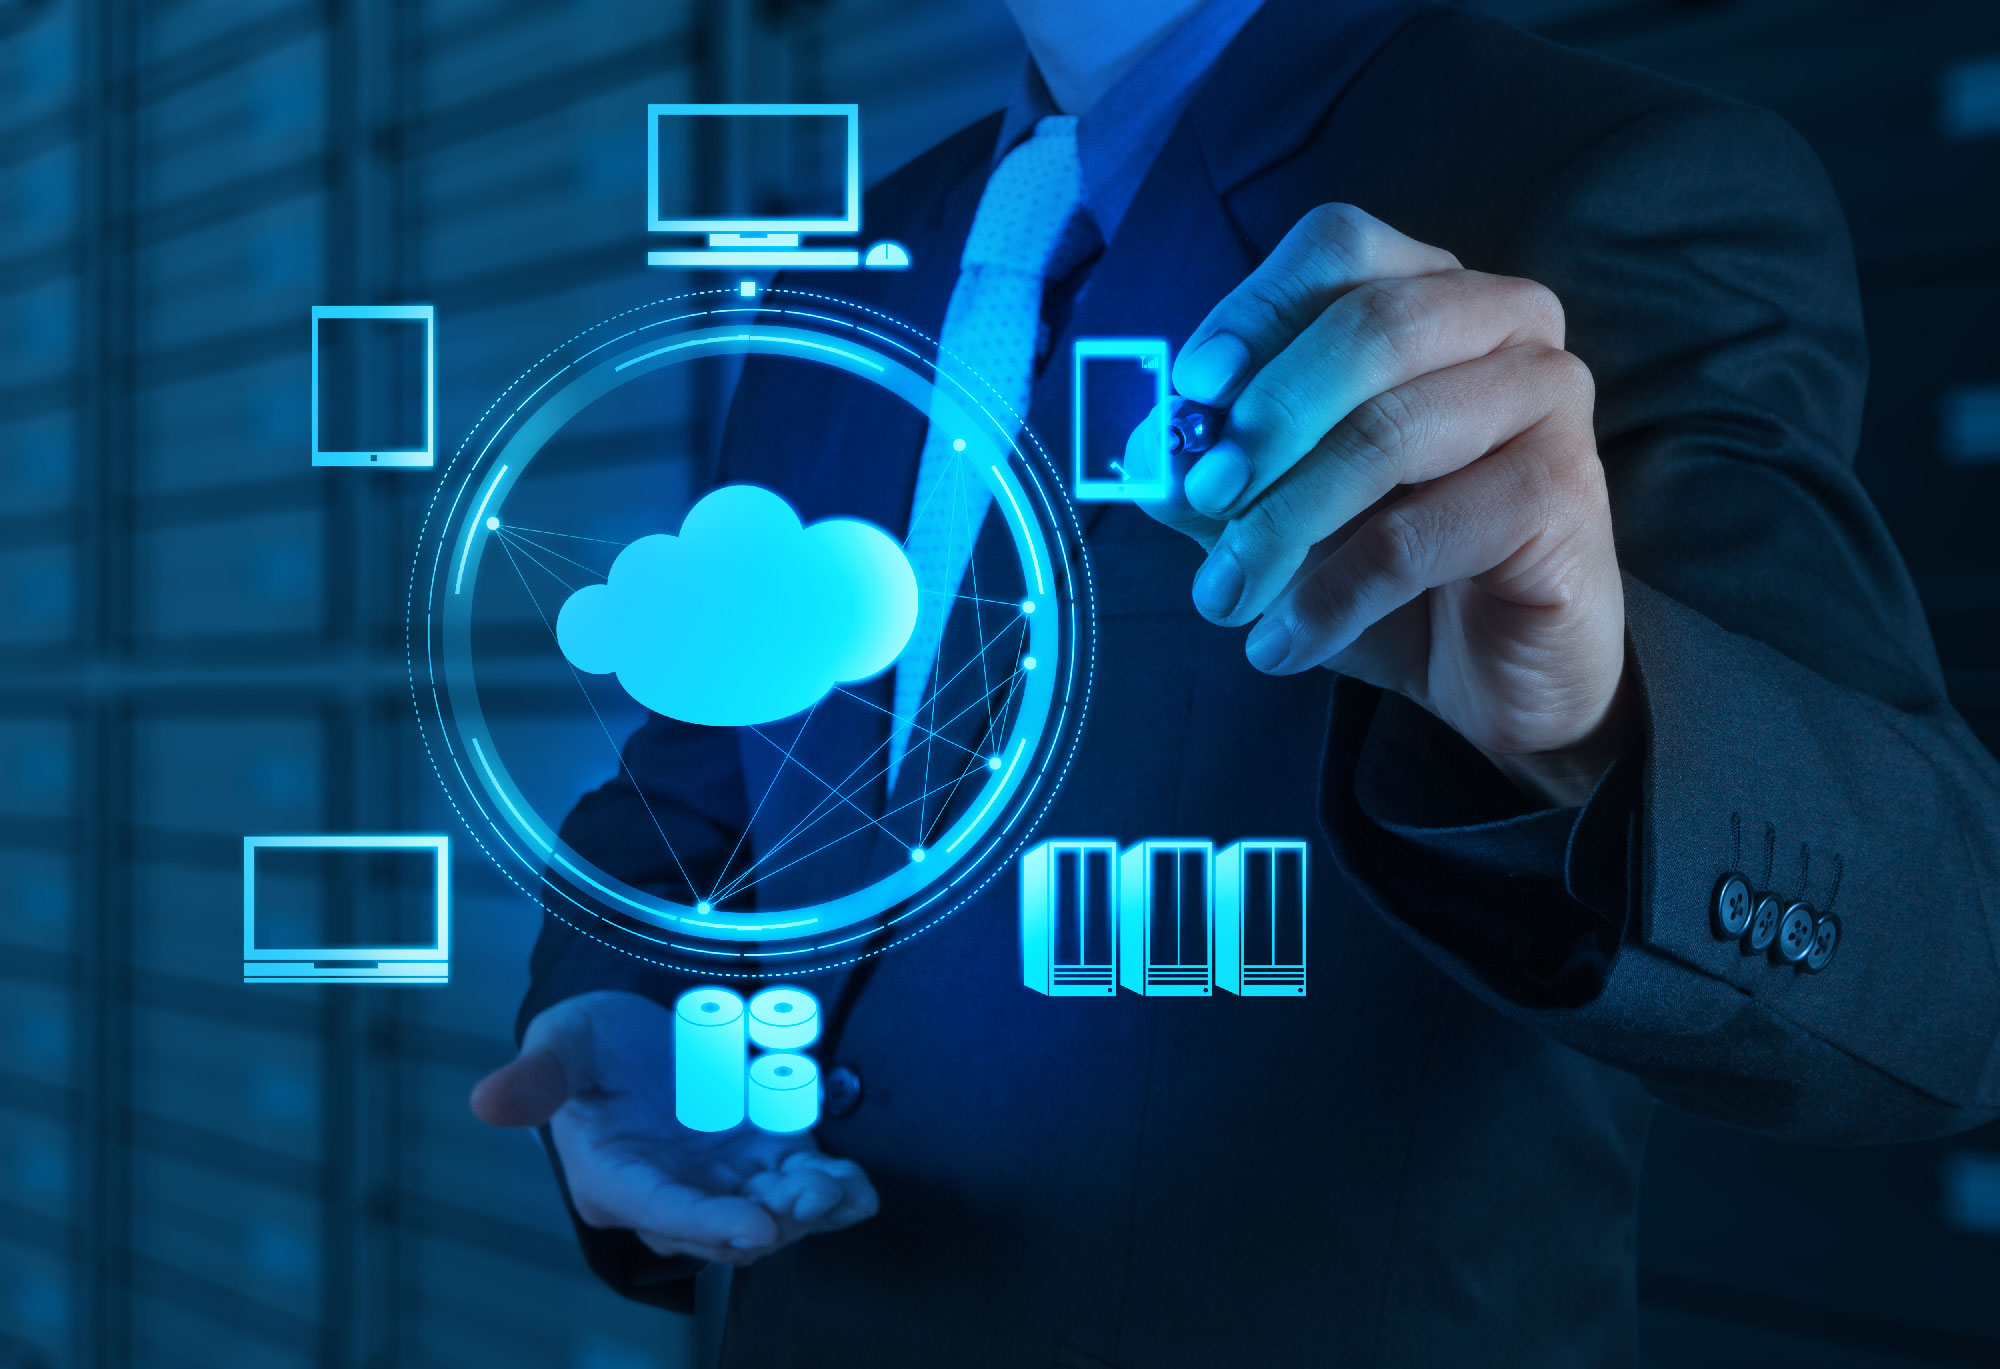 representation of the digital cloud with icons of computers, servers, and devices around it